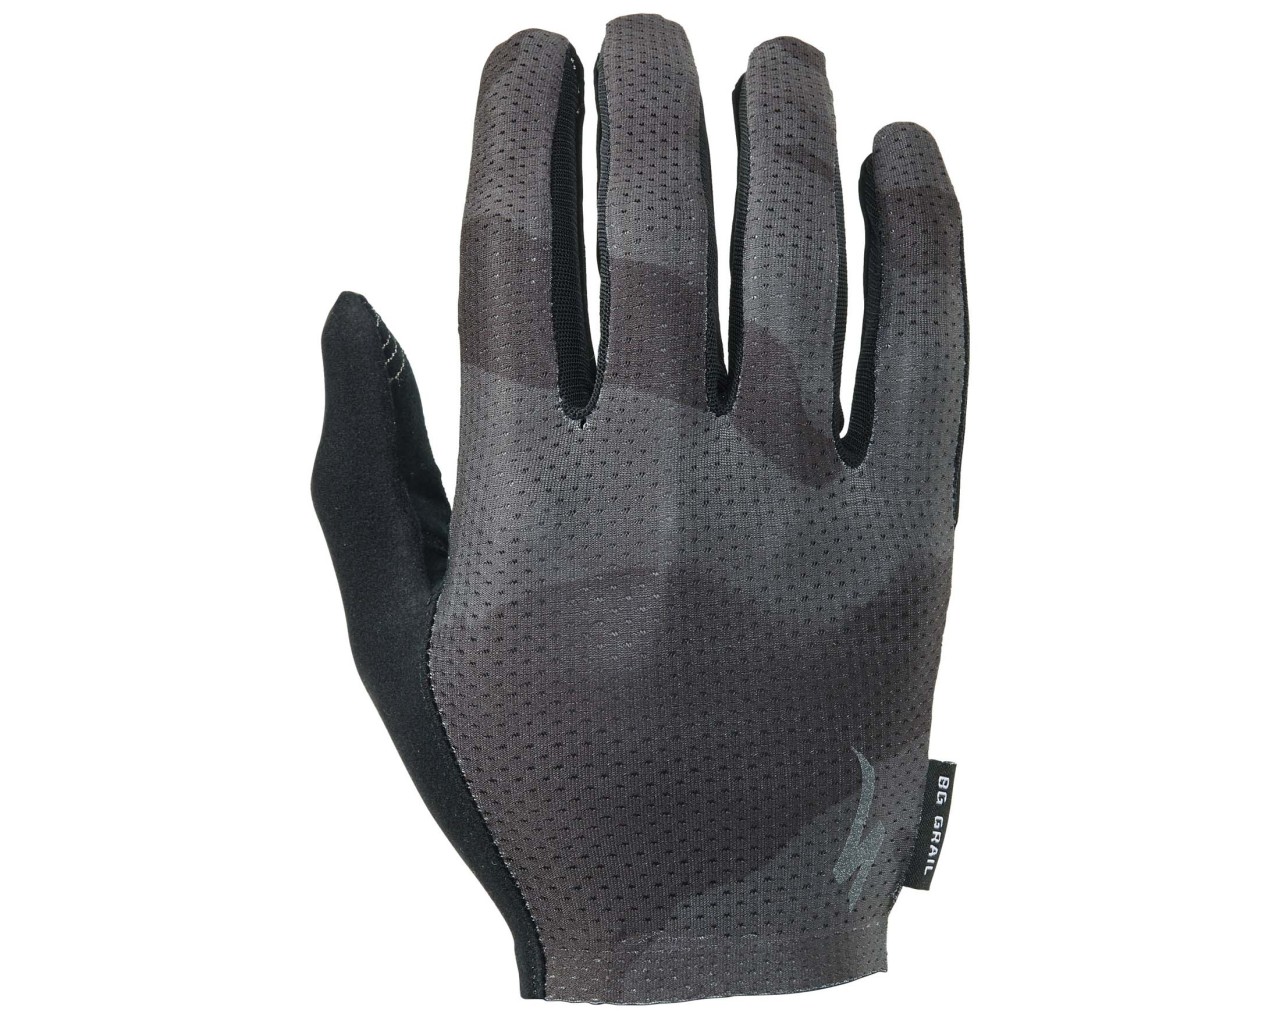 Specialized Body Geometry Grail Handschuhe langfinger | black-charcoal camo